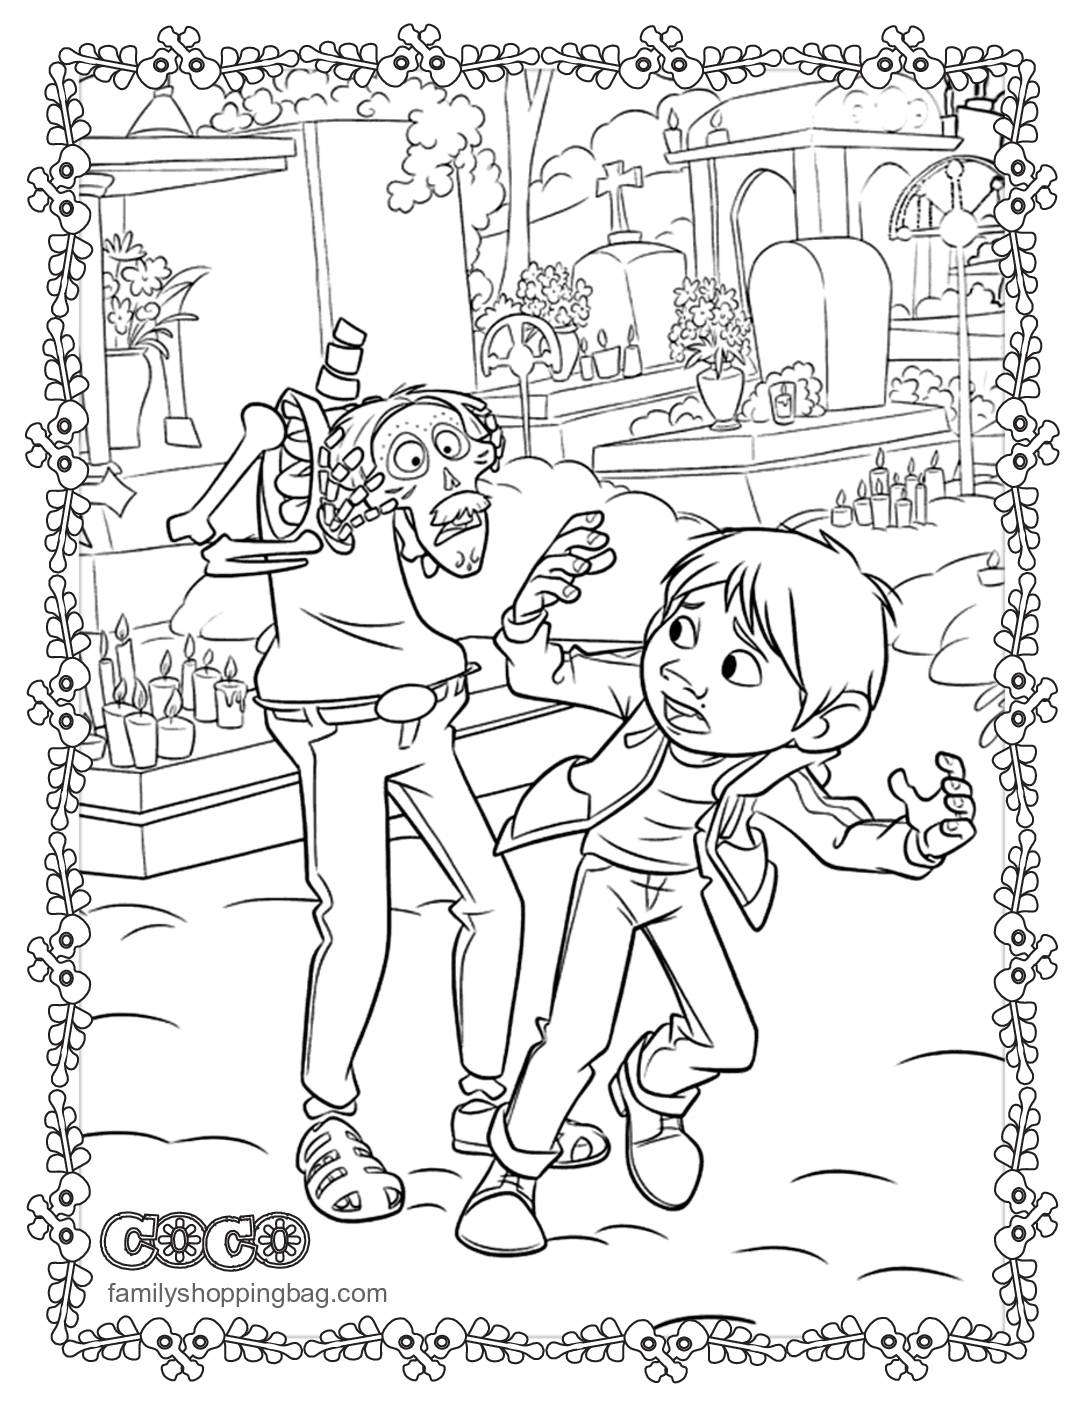 Coloring 5 Page Coco Coloring Pages